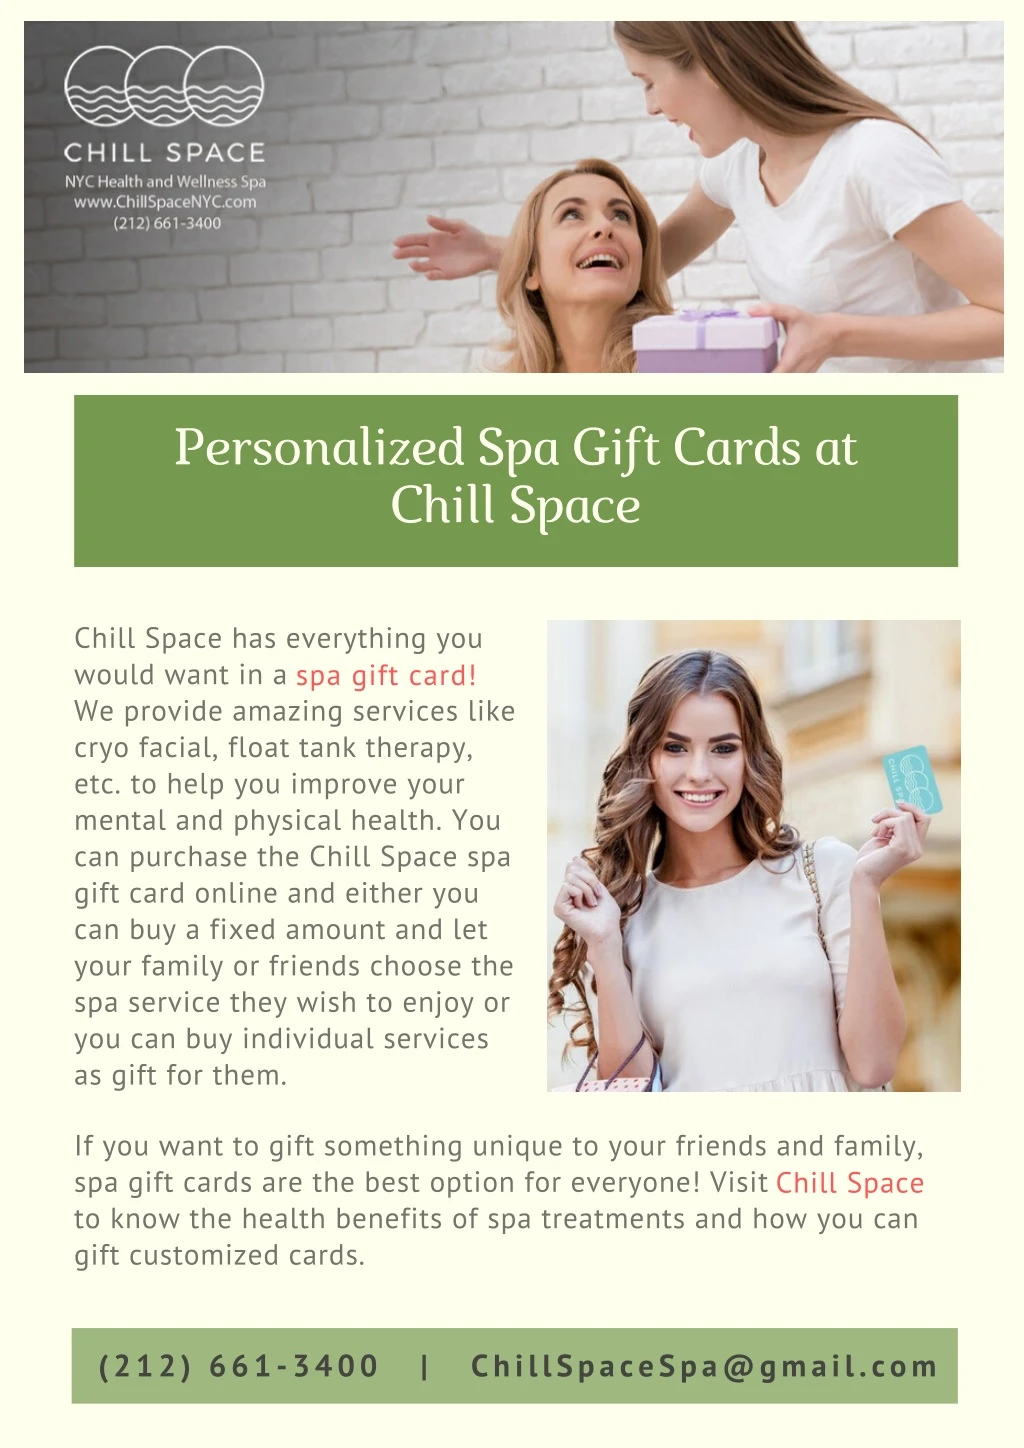 personalized spa gift c ards at c hill space